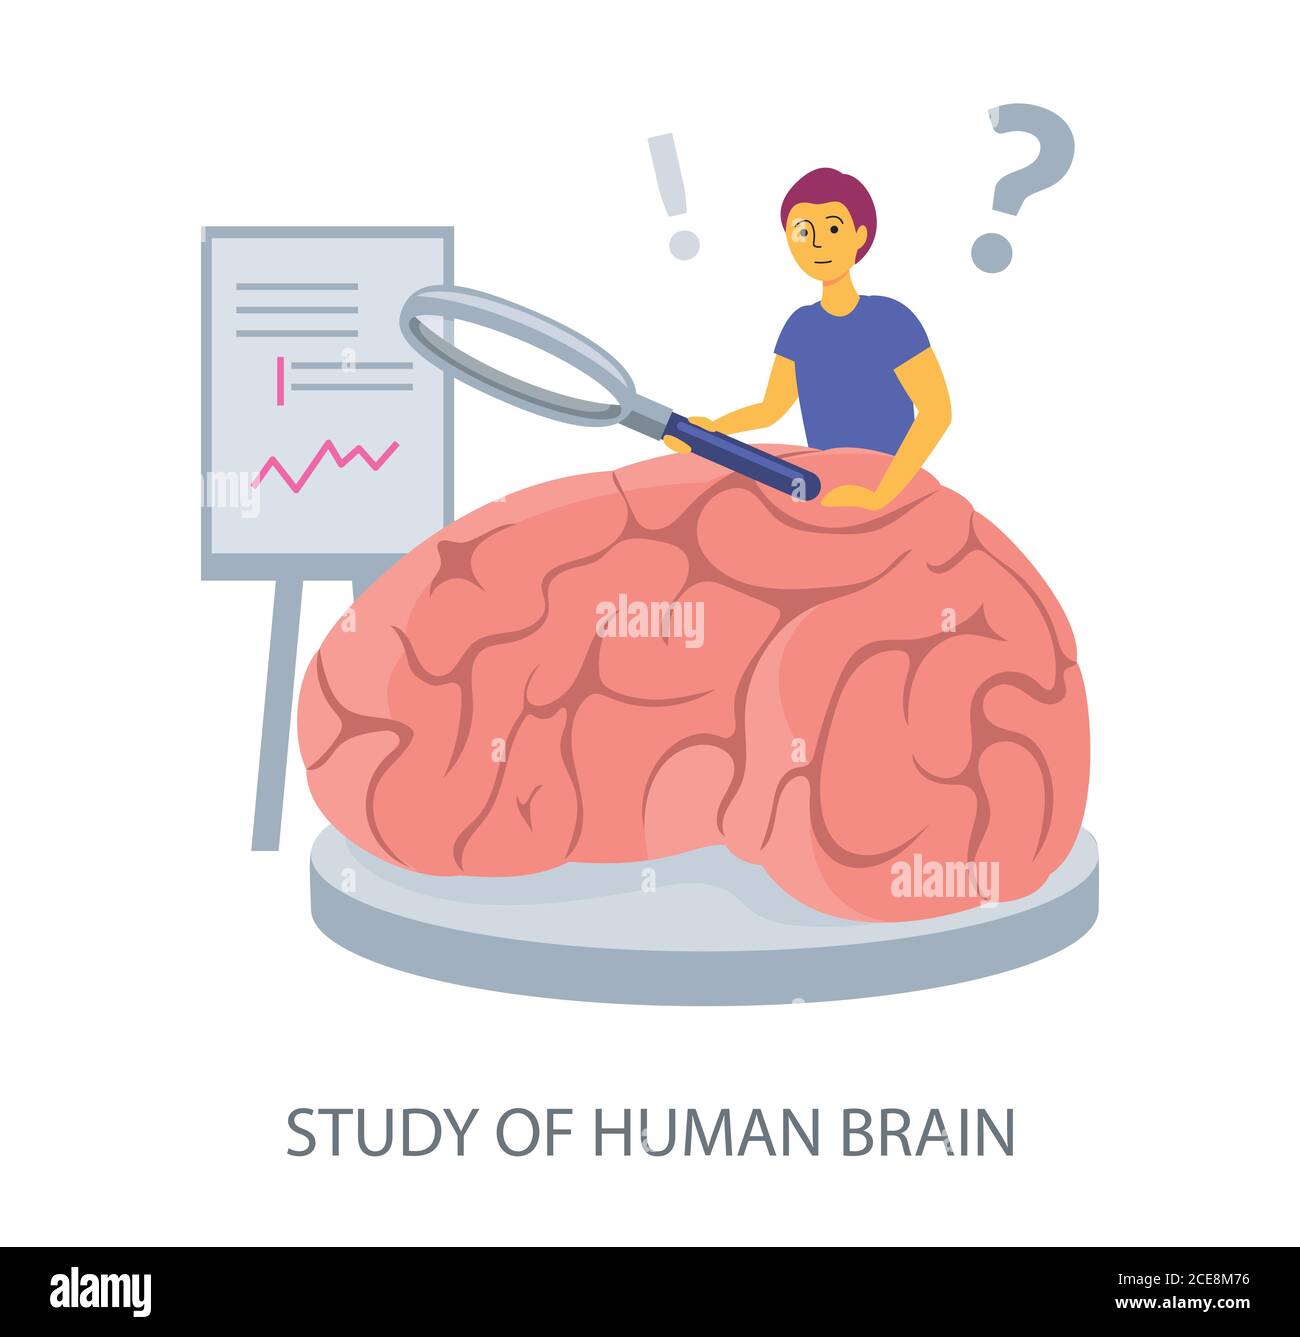 Study of Human Brain concept on white background, flat design vector illustration Stock Vector